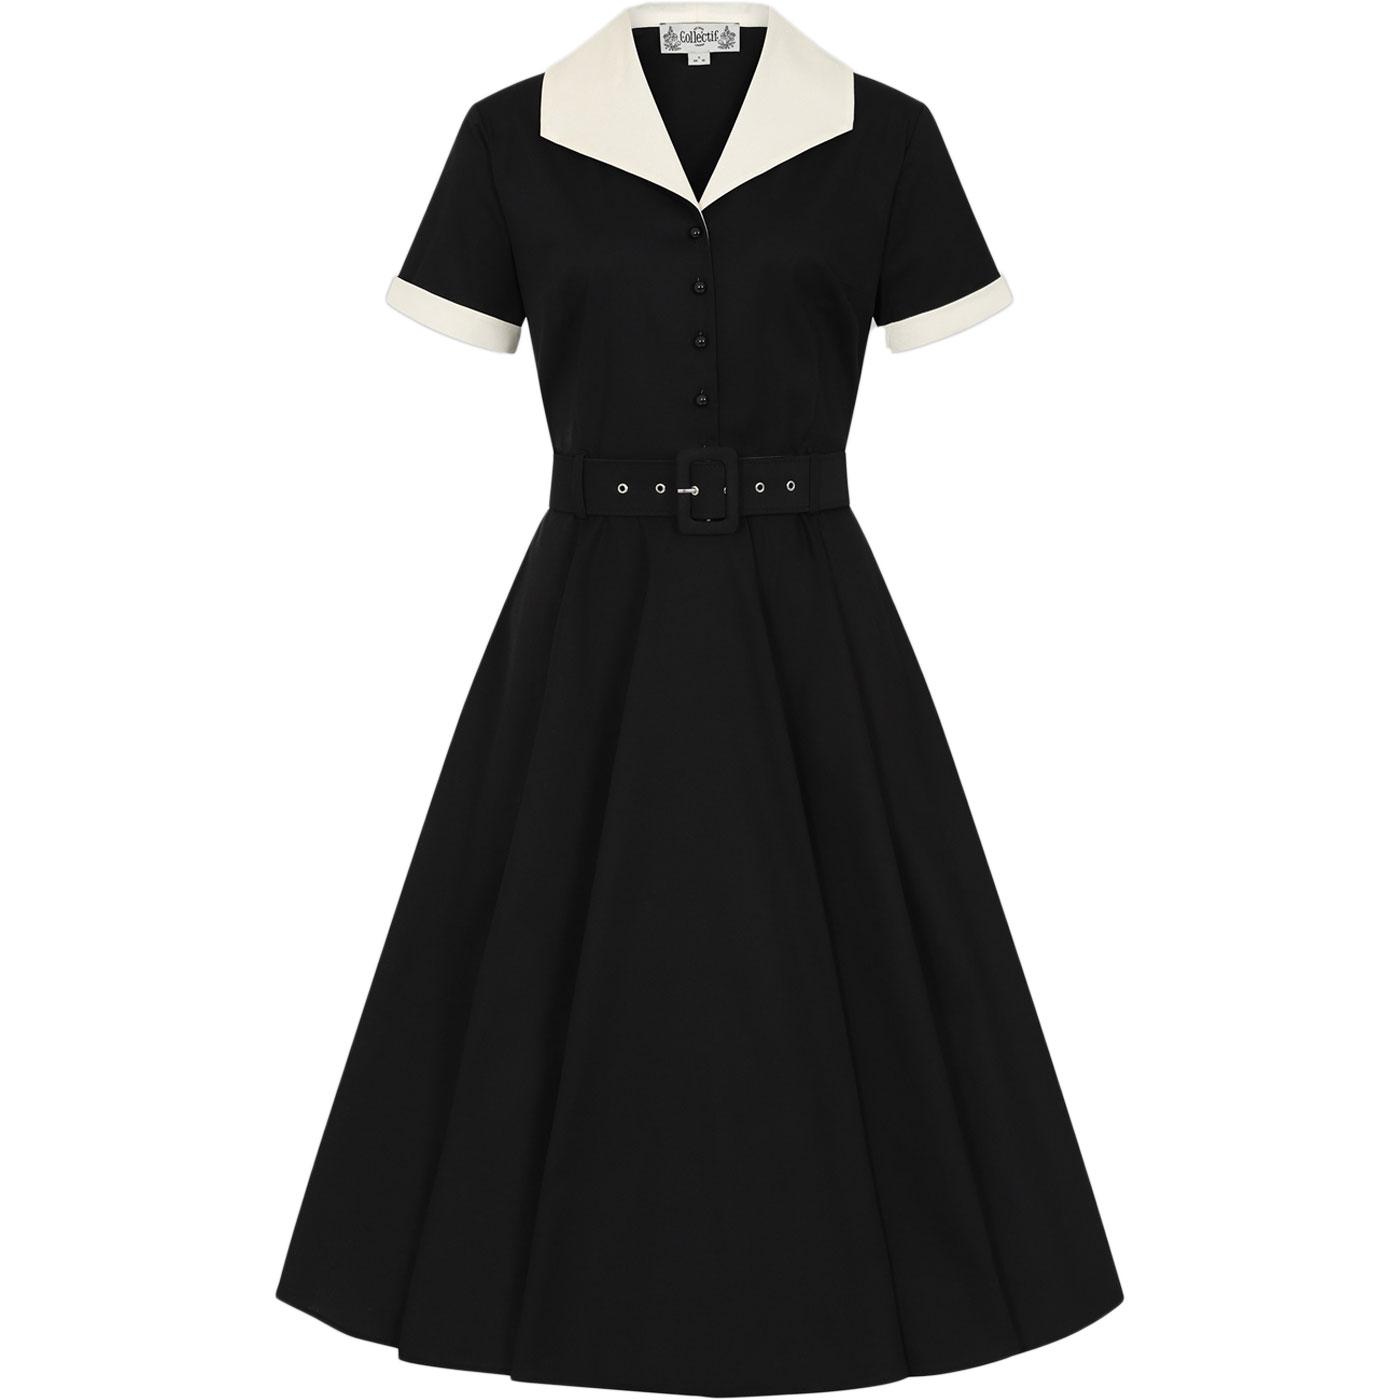 Taylor COLLECTIF Retro 50s Diner Style Swing Dress